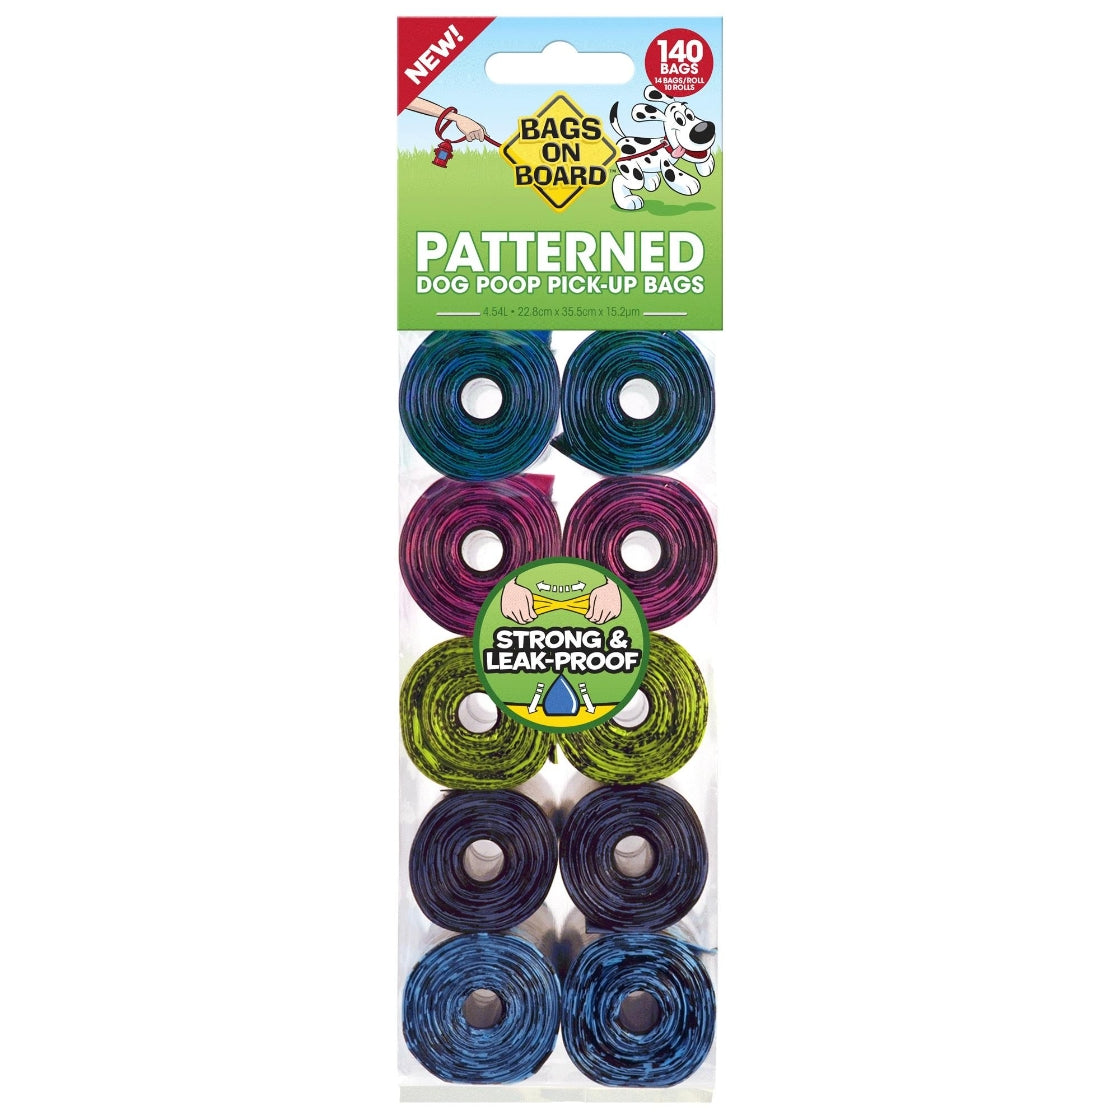 BAGS ON BOARD Refill Pack Patterened Print (14 bags x 10 Rolls)